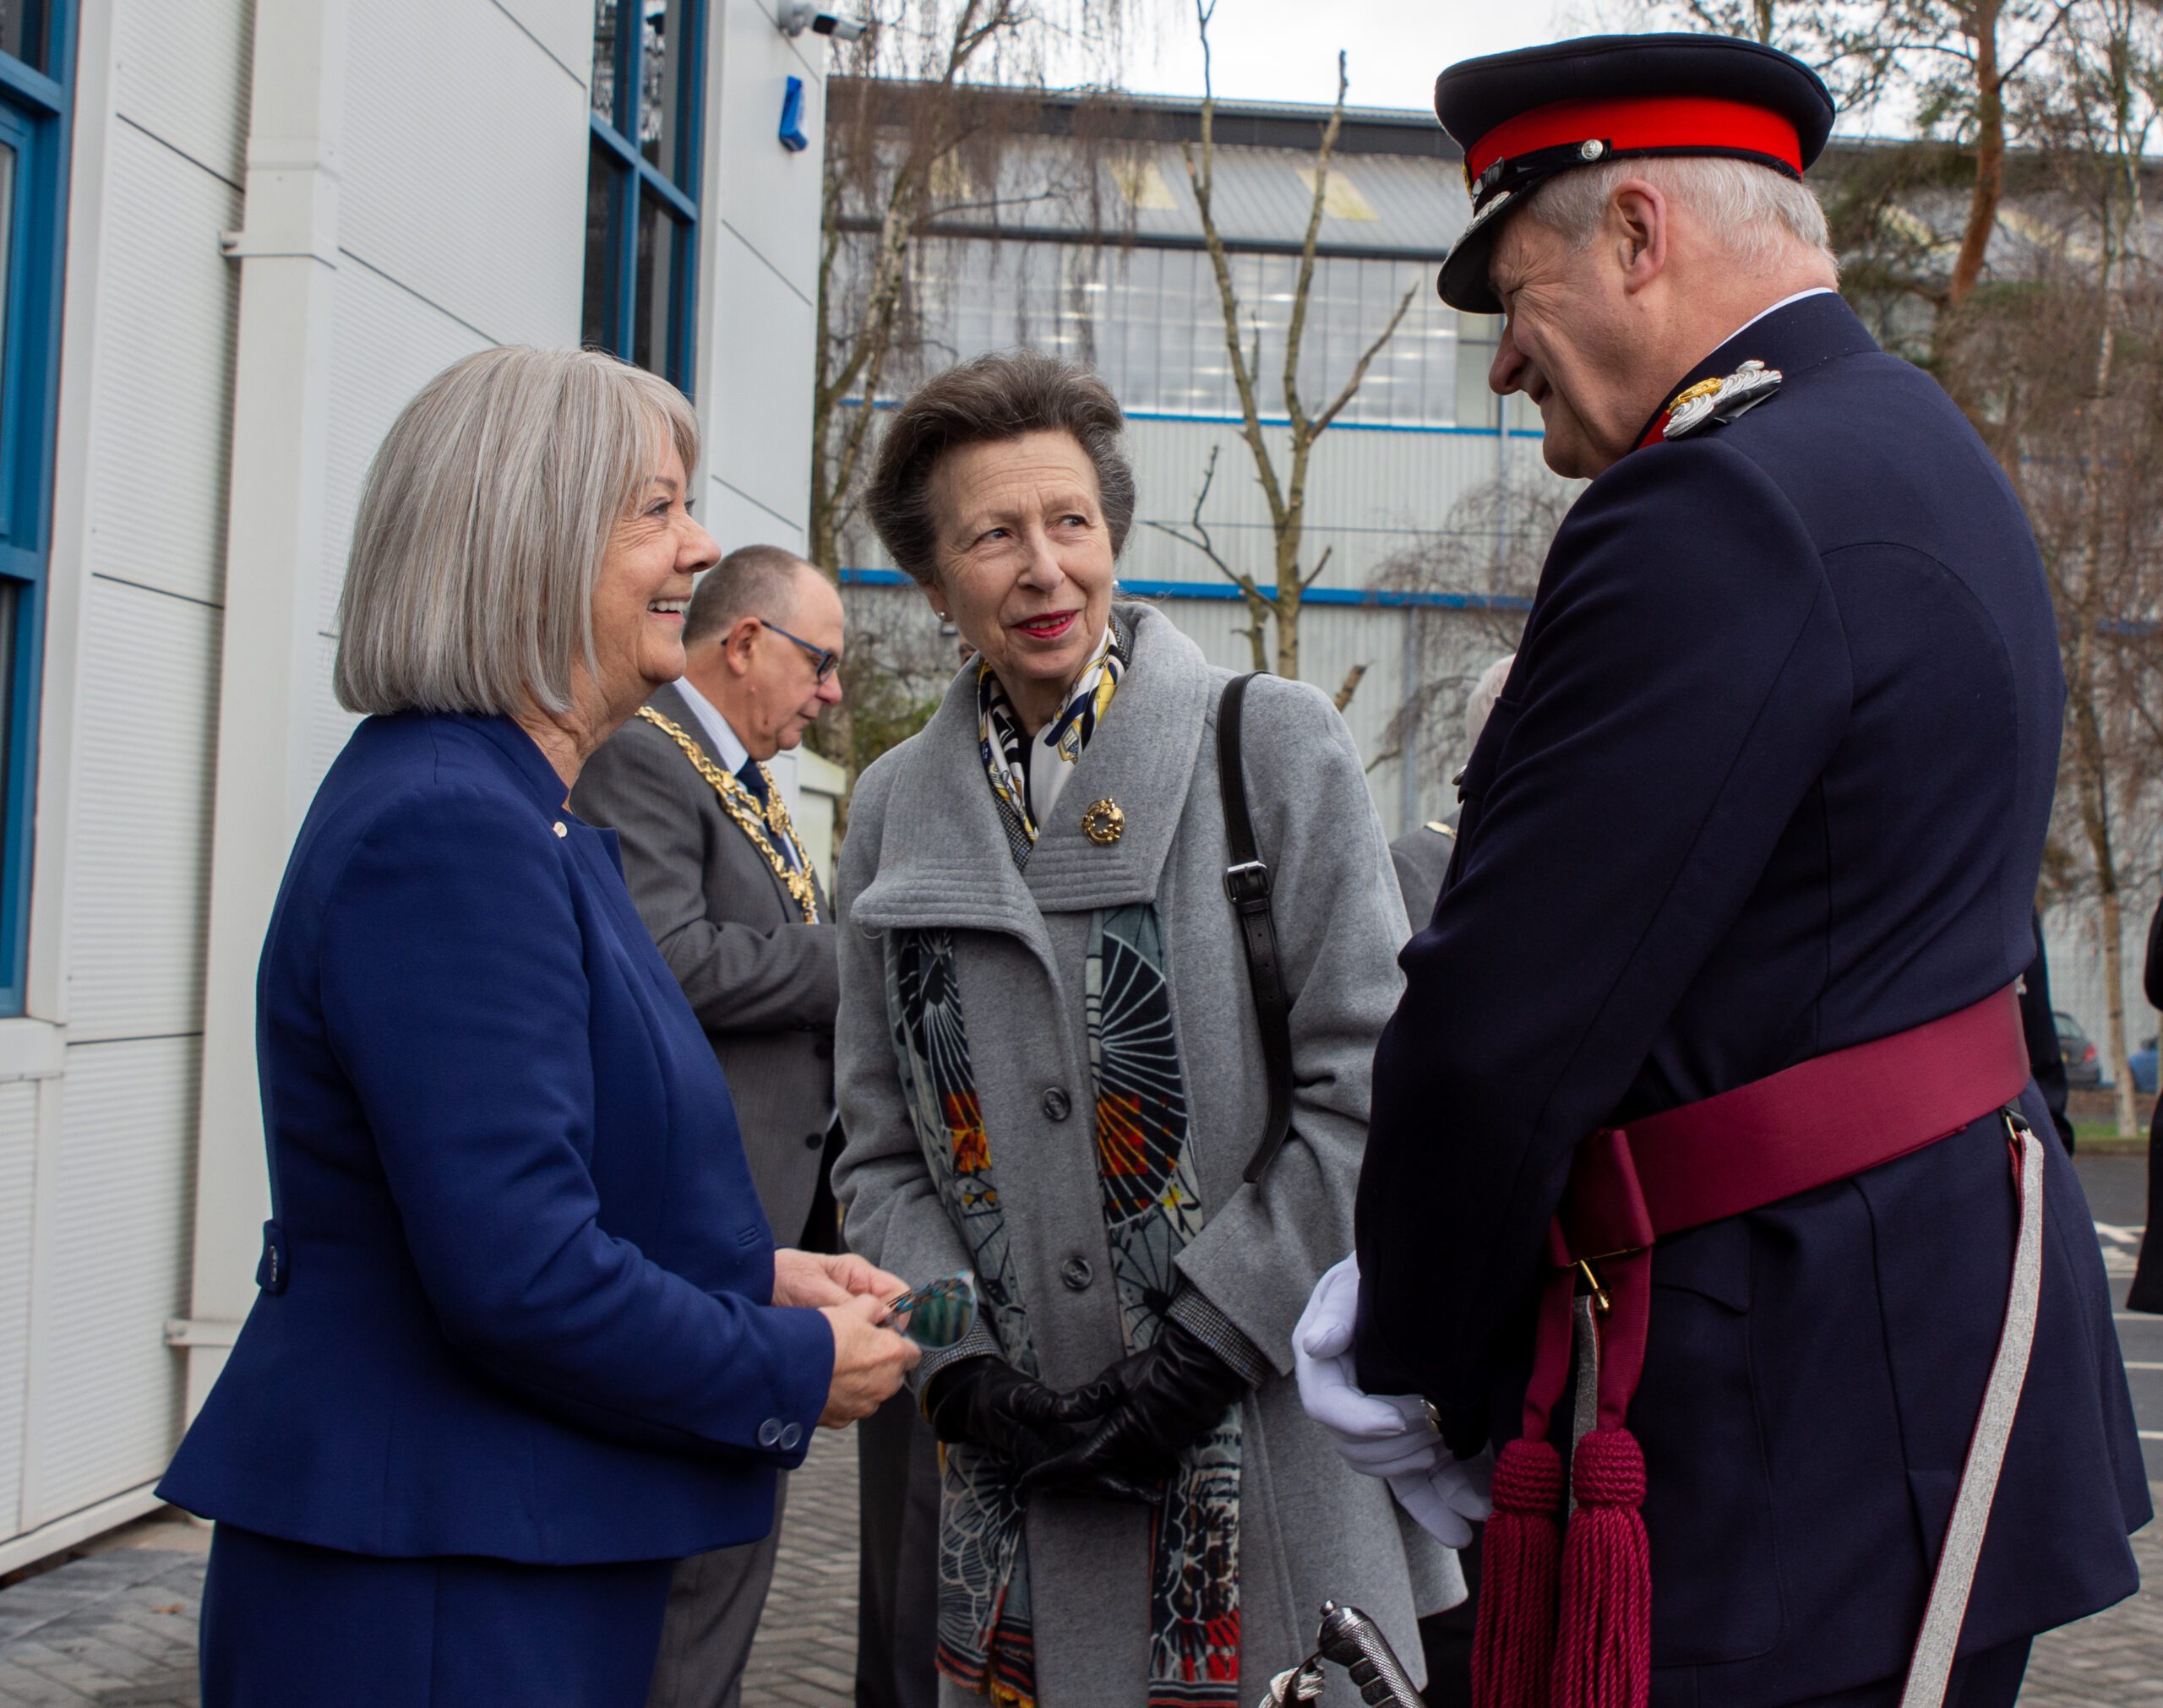 The Princess Royal visited Vision Labs in Kidderminster